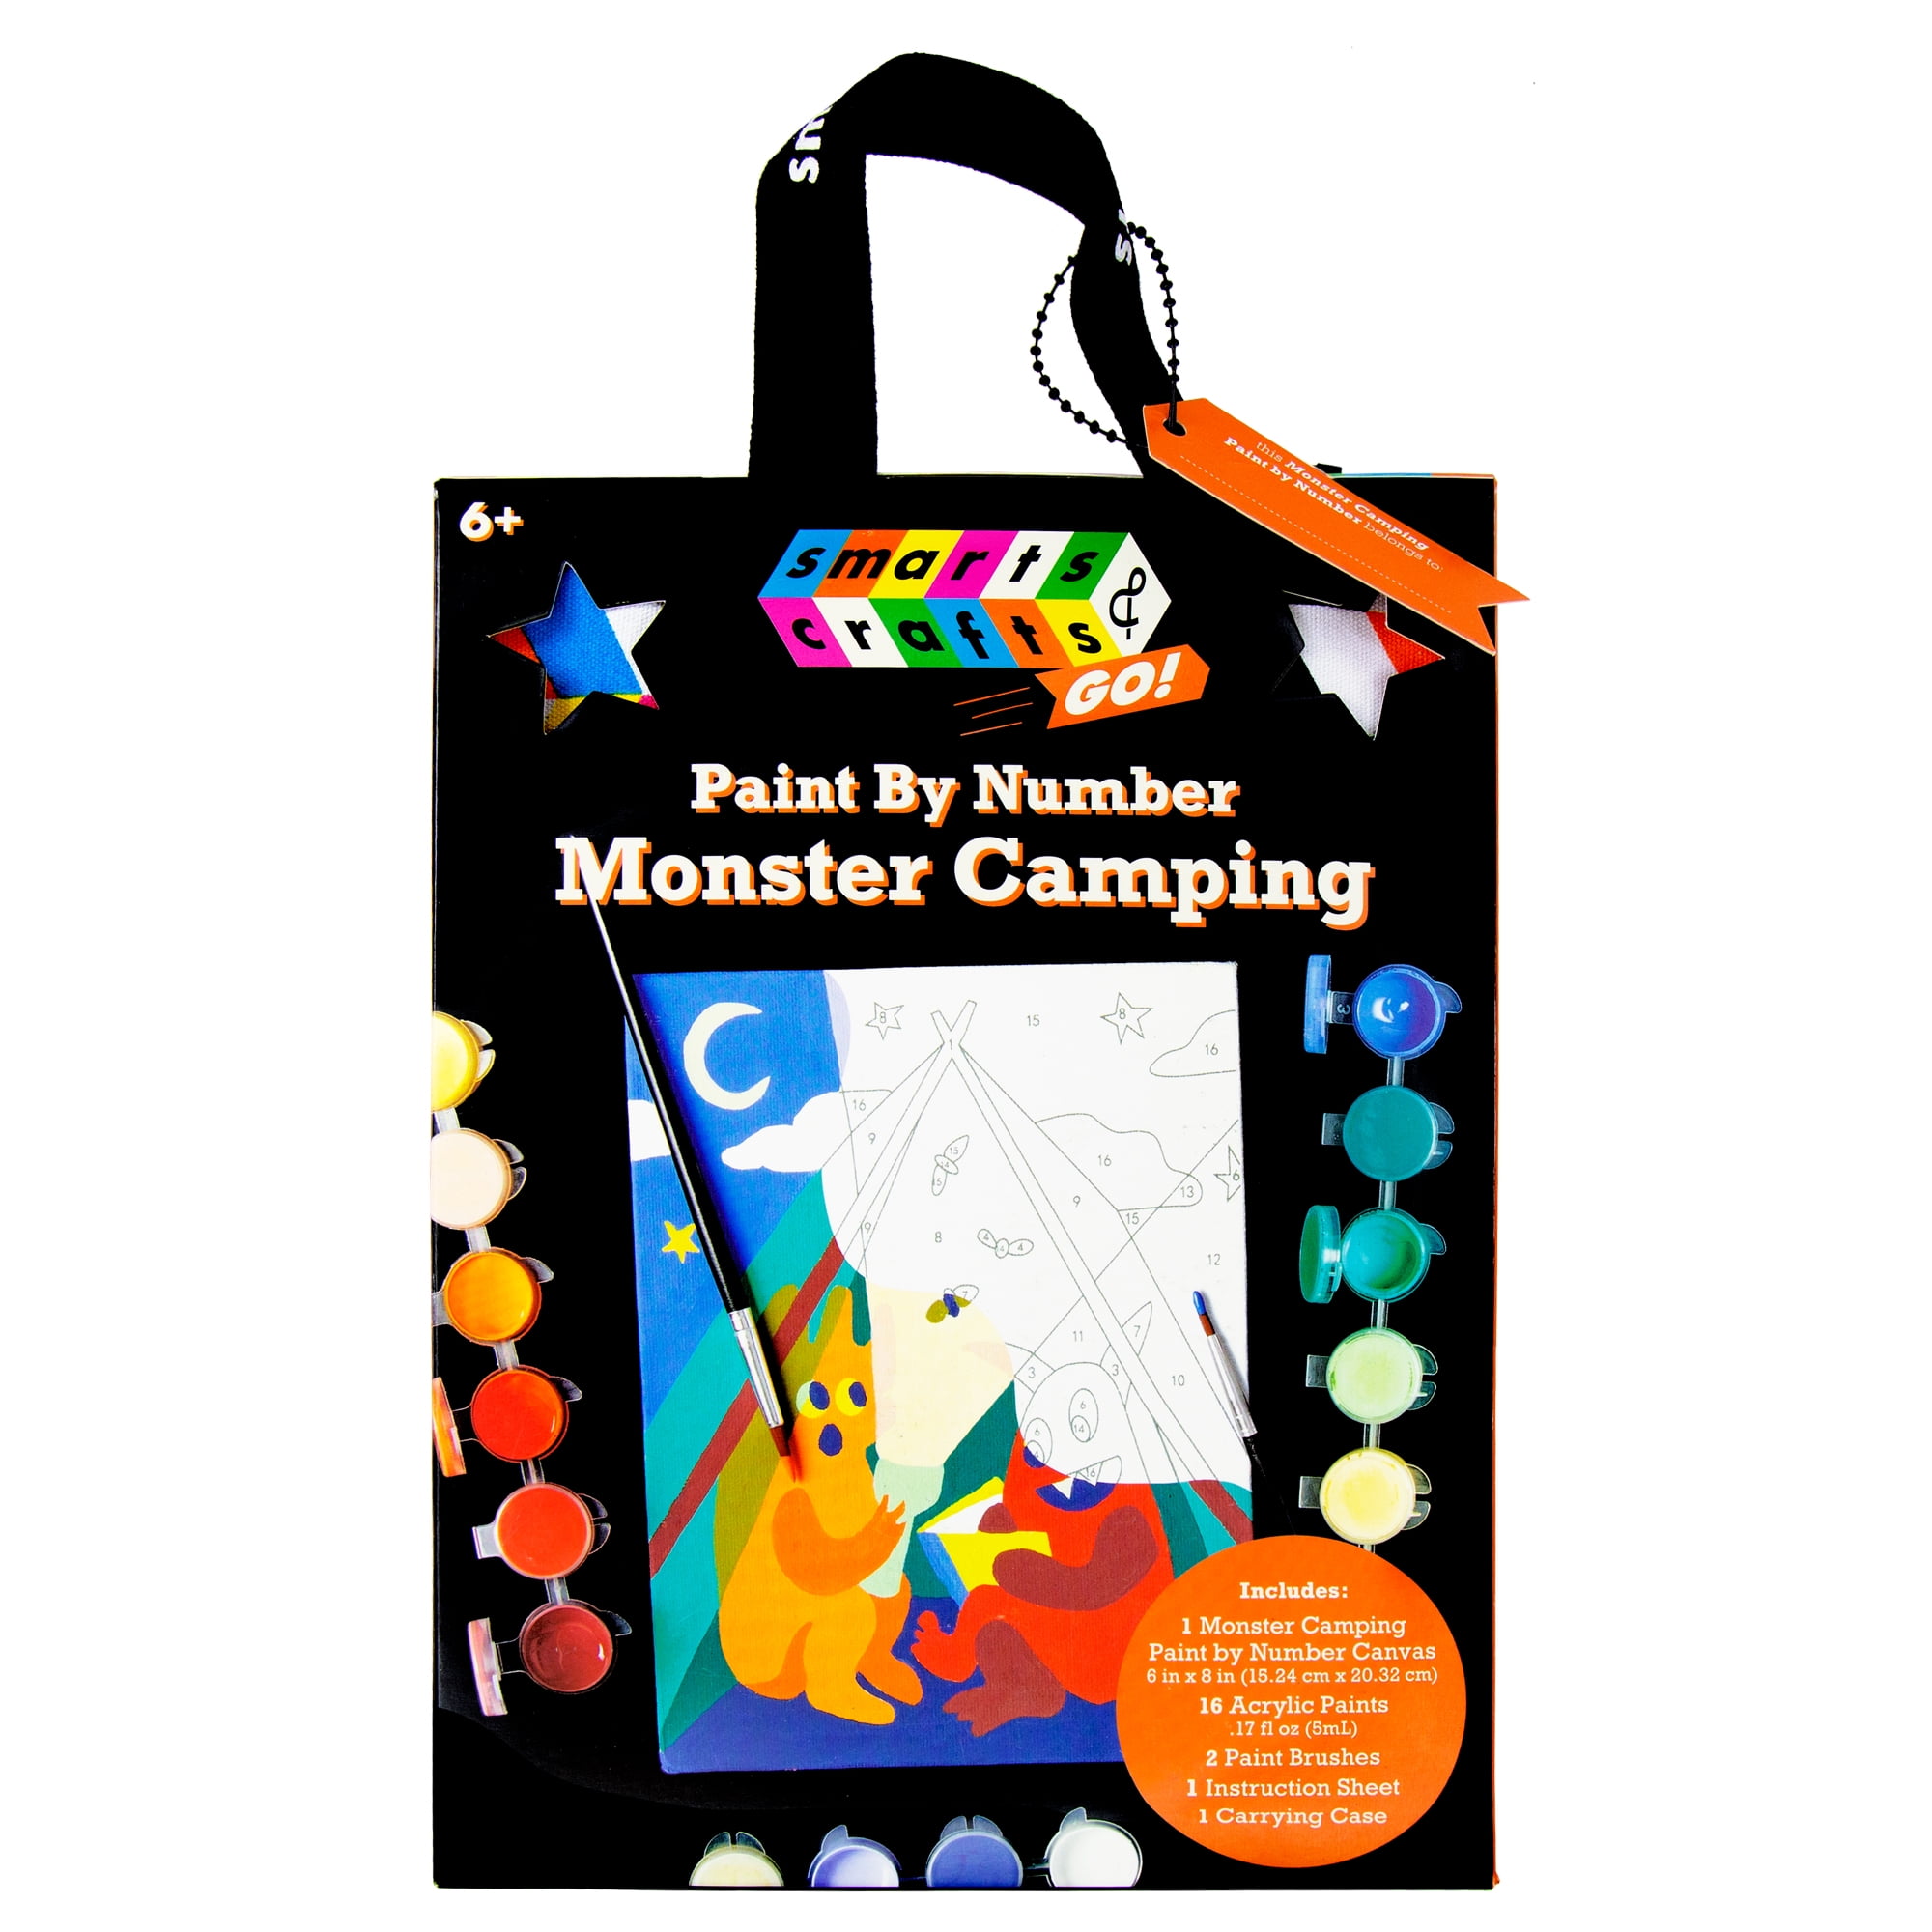 Smarts & Crafts: 21-Pc Monster Camping Kids' Paint by Number $3.37, Paint & Play Wood Unicorn Craft Set $7.53, 49-Pc Art Supply Library $17 + Free Shipping w/ Walmart+ or on $35+